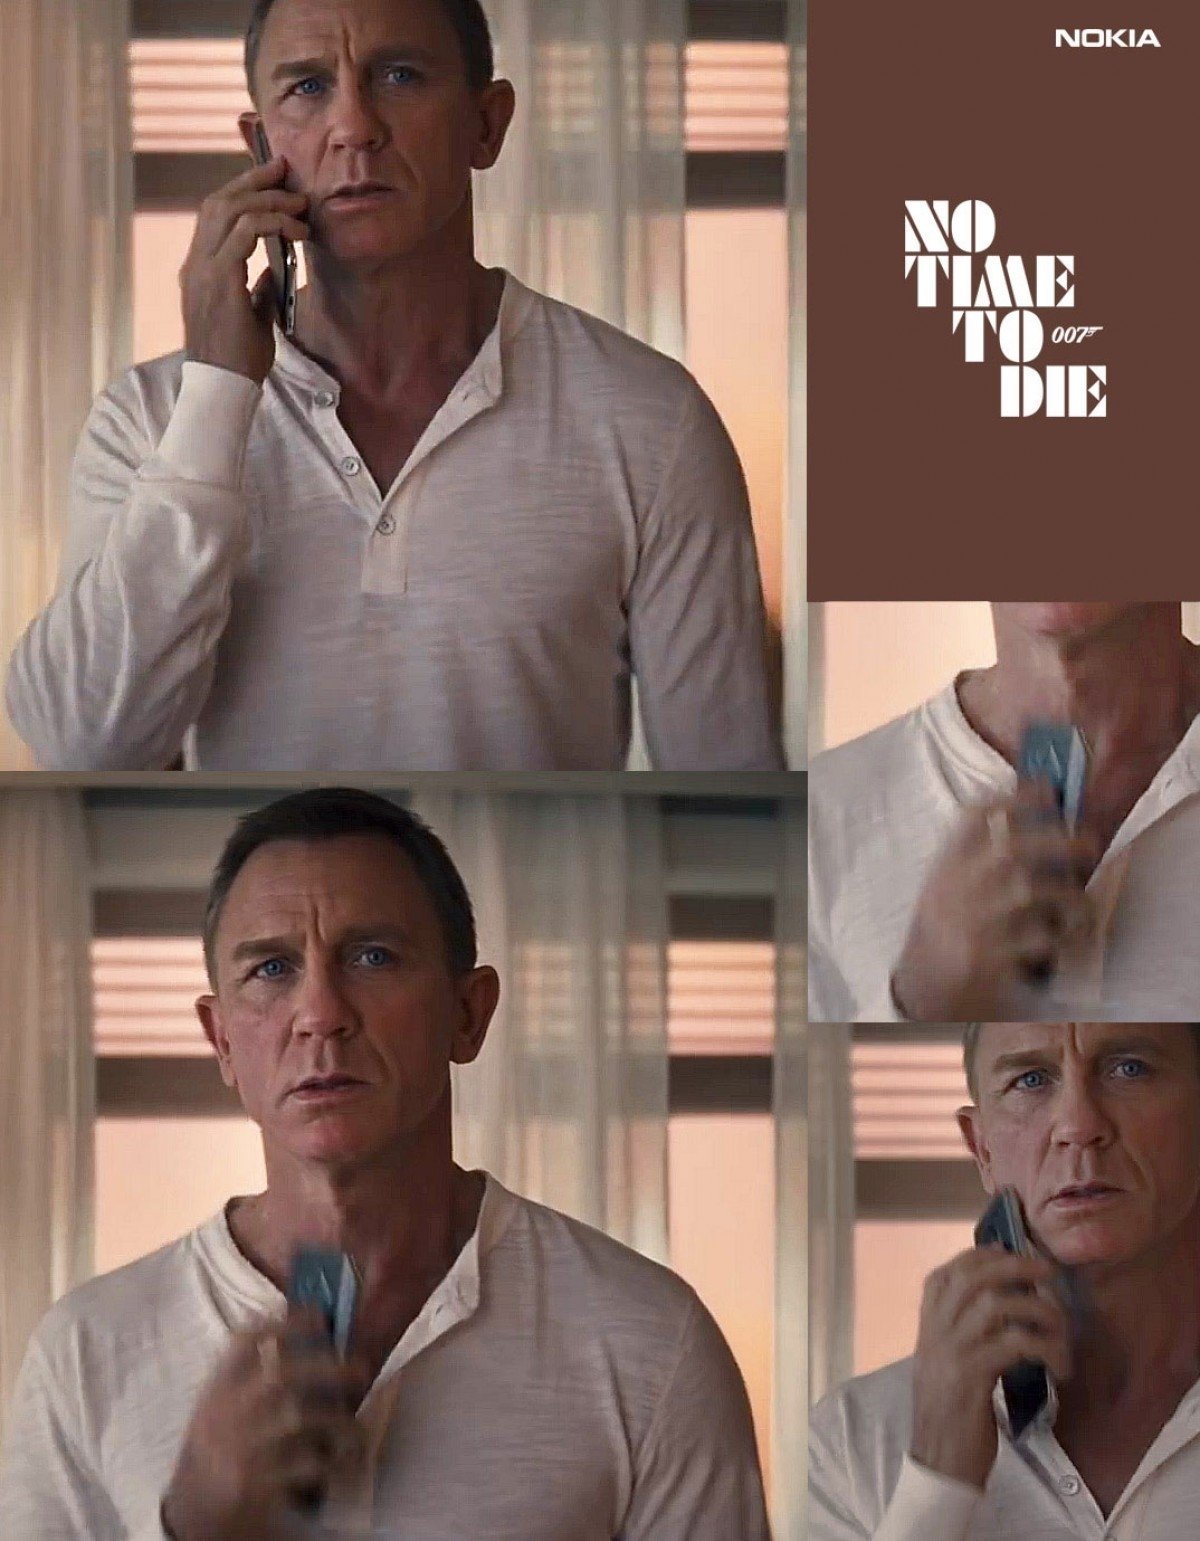 Nokia in 007 'No Time To Die'